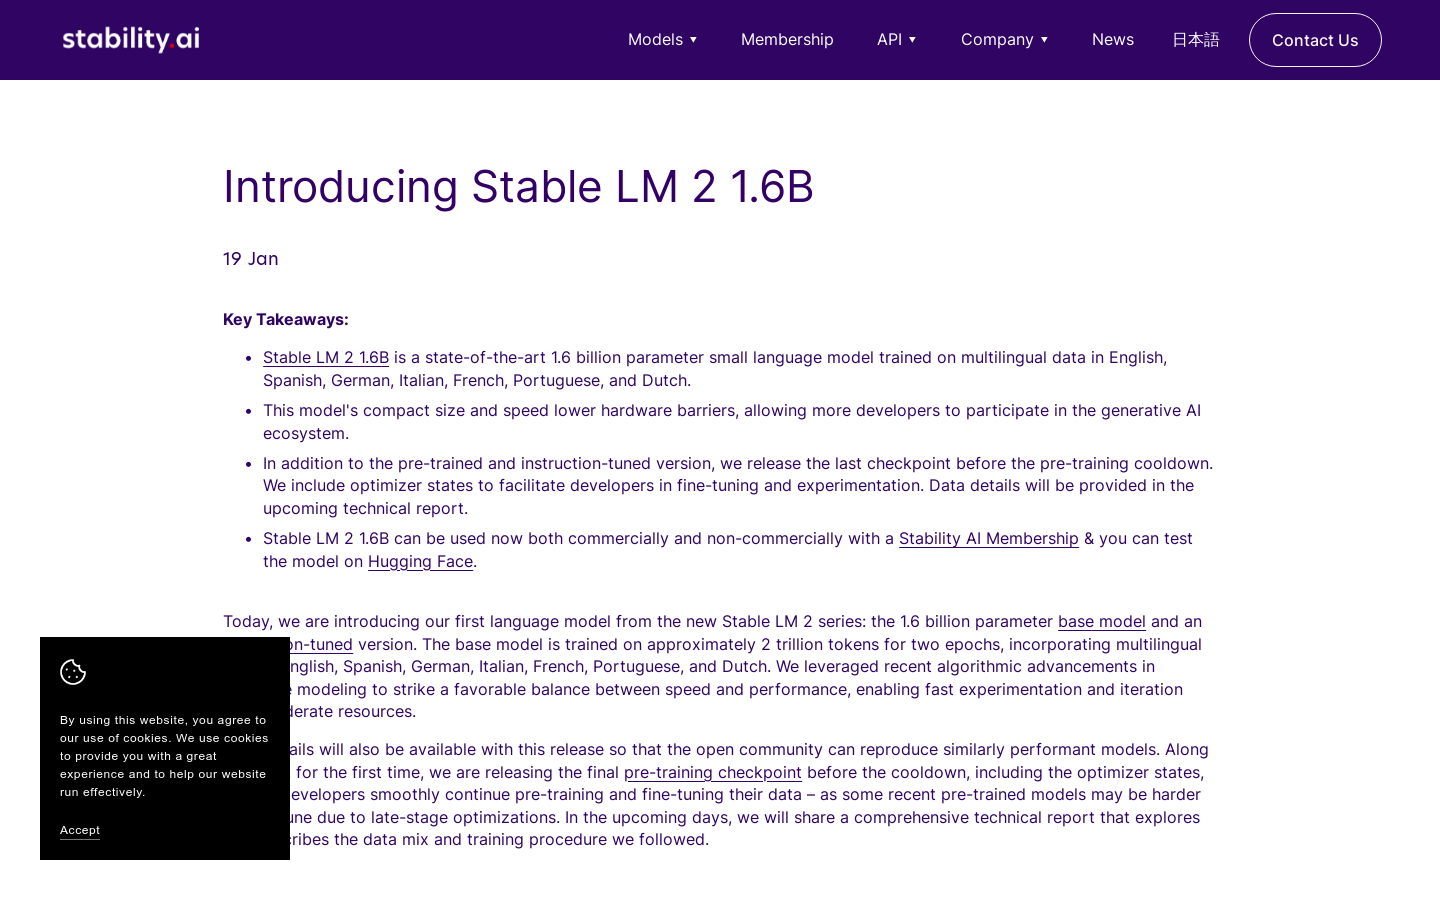 Stable LM 2 1.6B